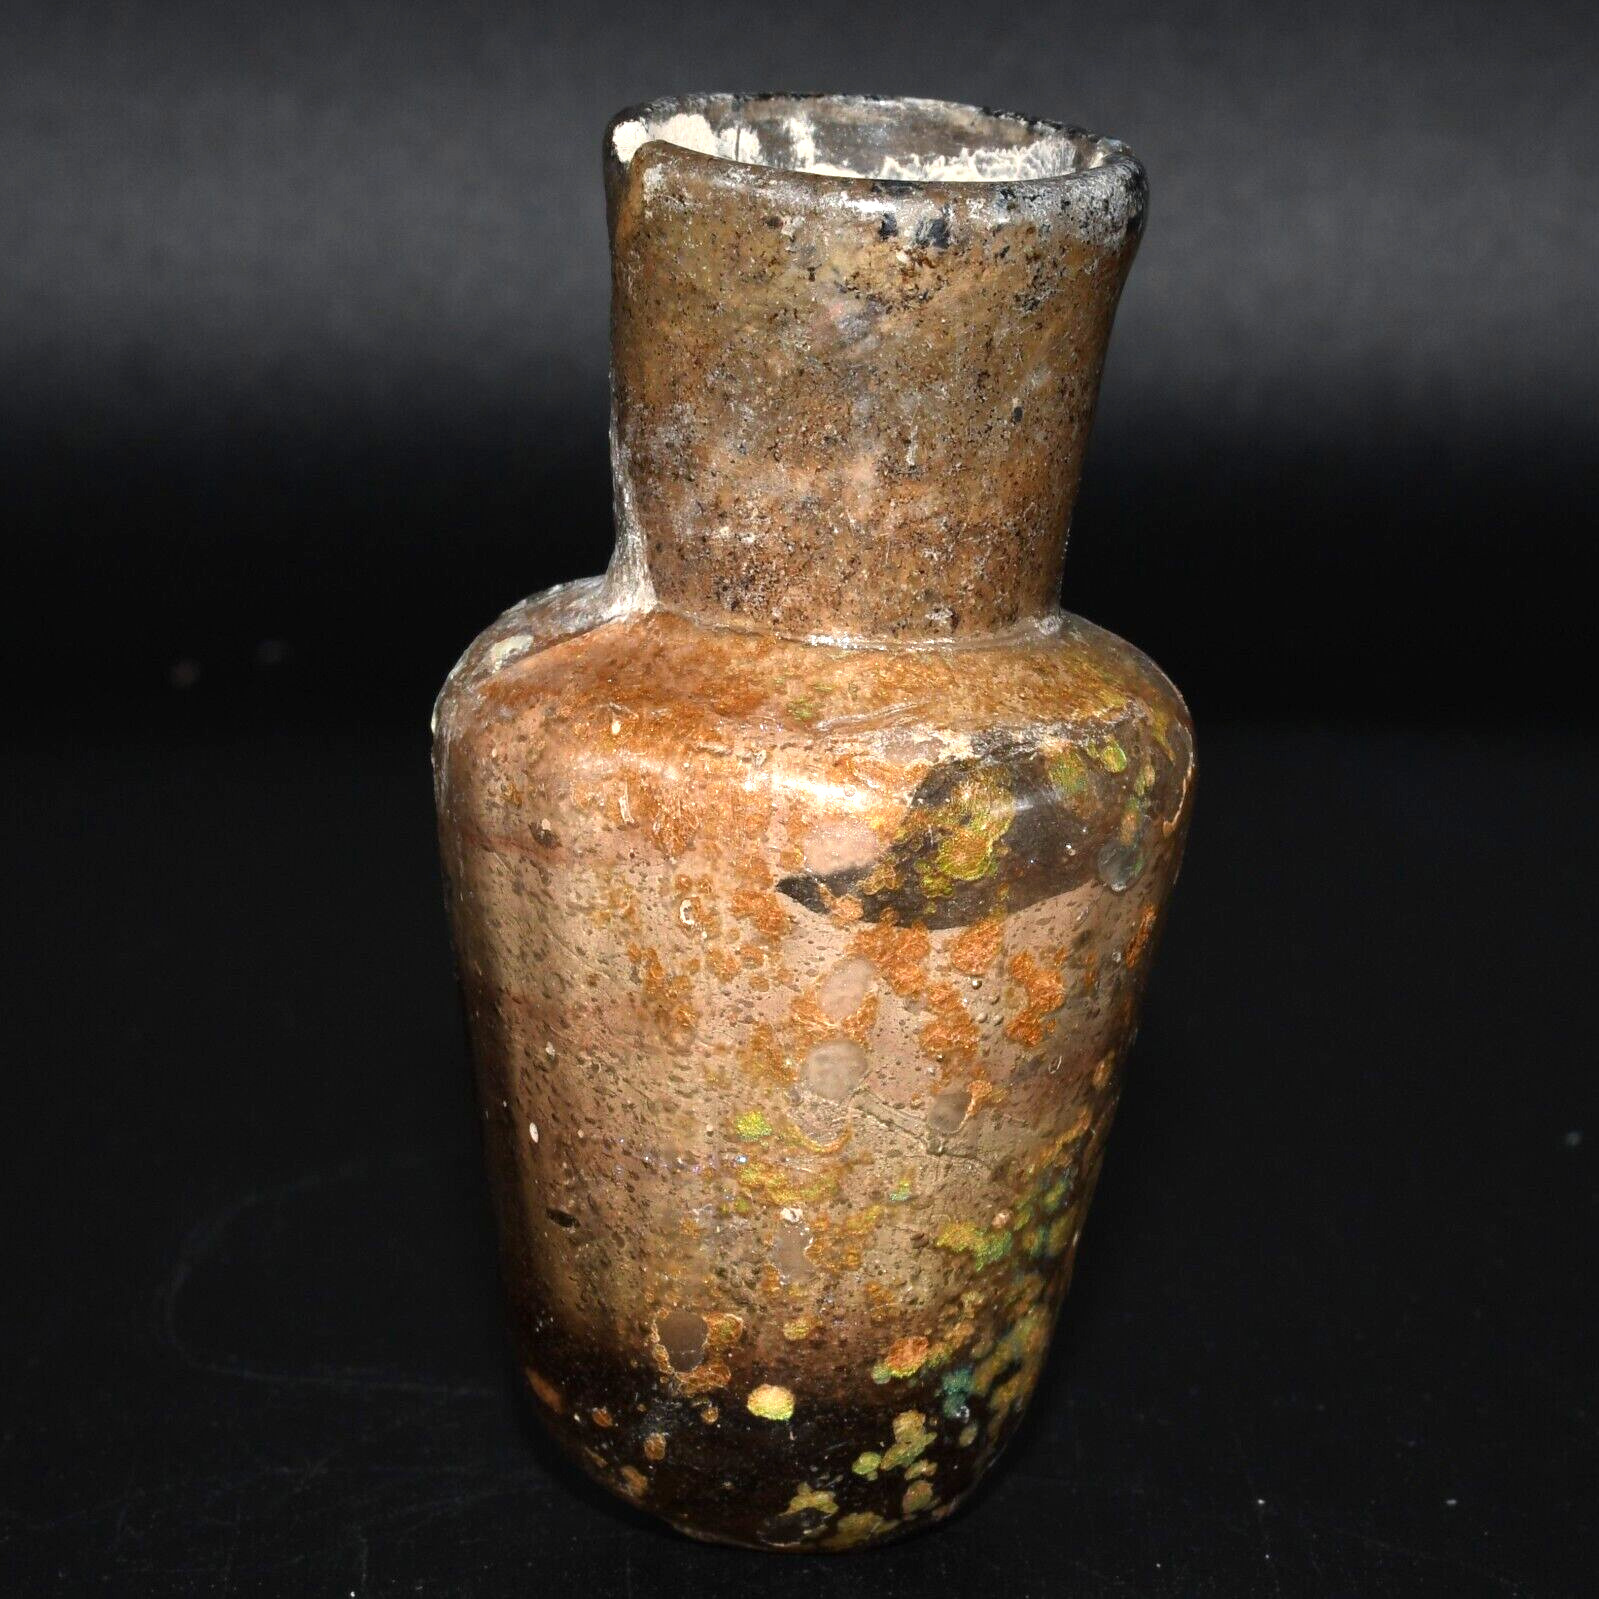 Authentic Ancient Roman Glass Bottle with Amber Color Circa 1st - 2nd Century AD